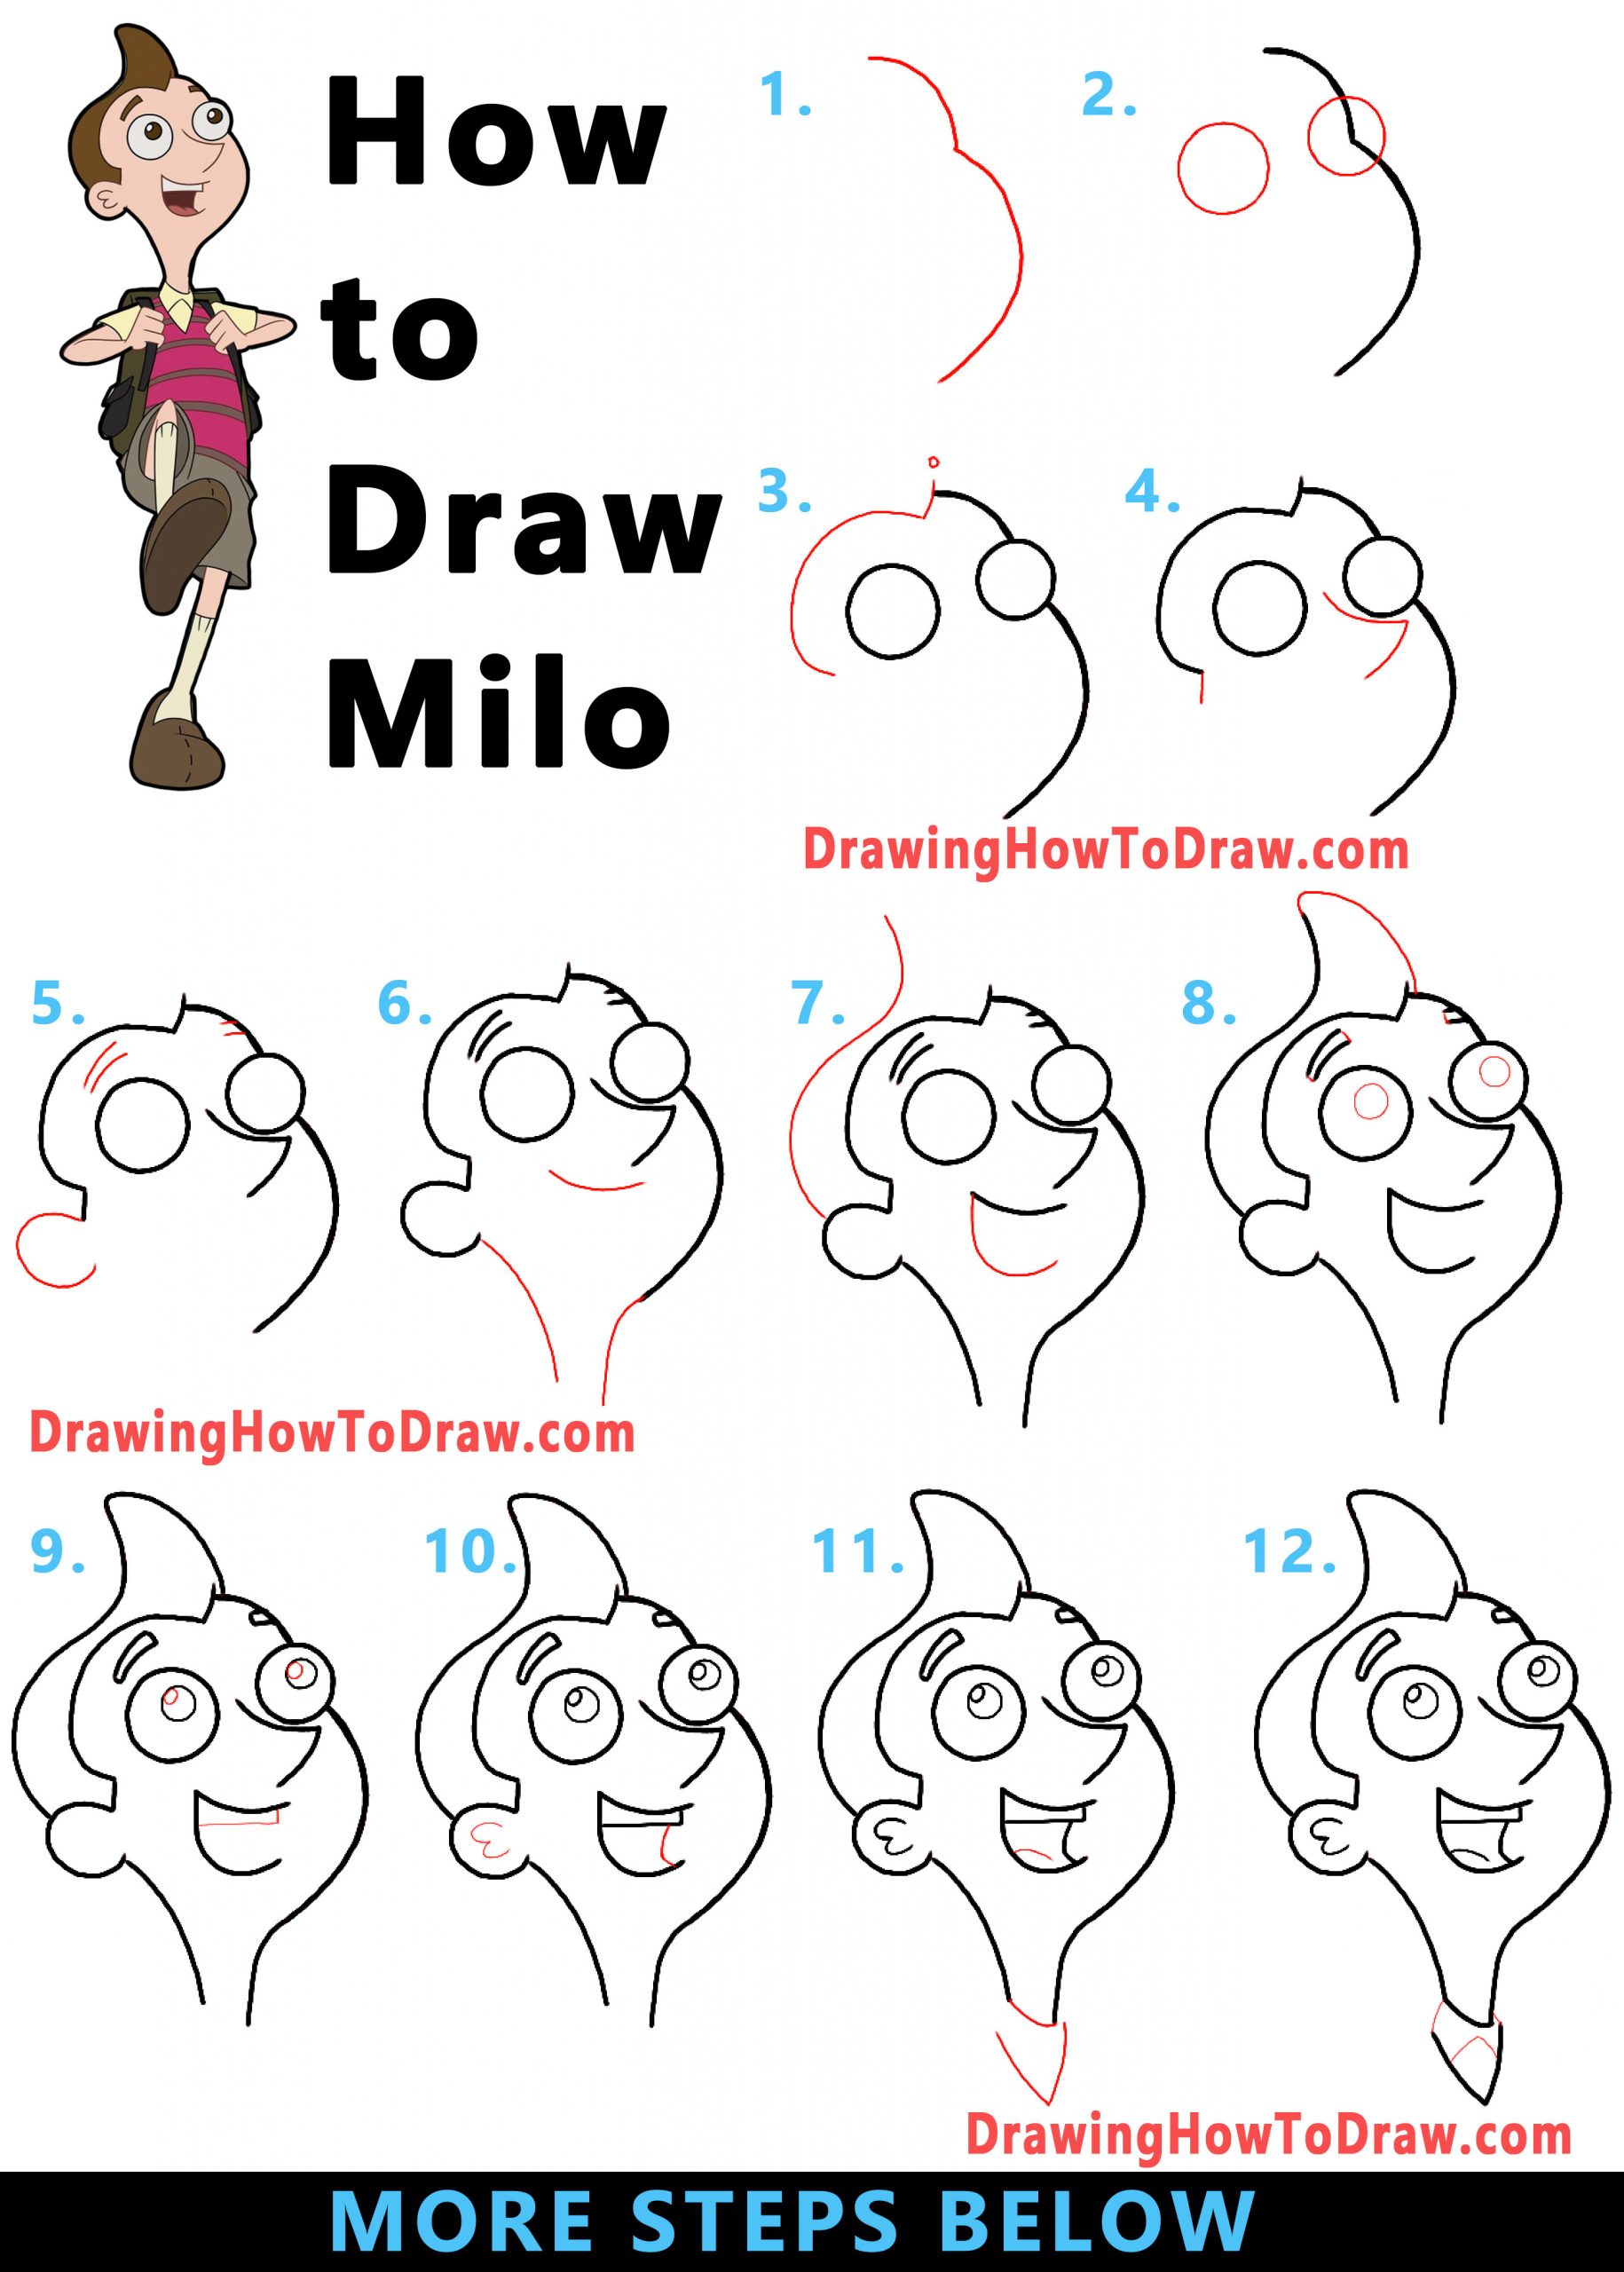 How to Draw Milo Murphy from Disney's Murphy's Law - Easy Step by Step Drawing Tutorial for Kids